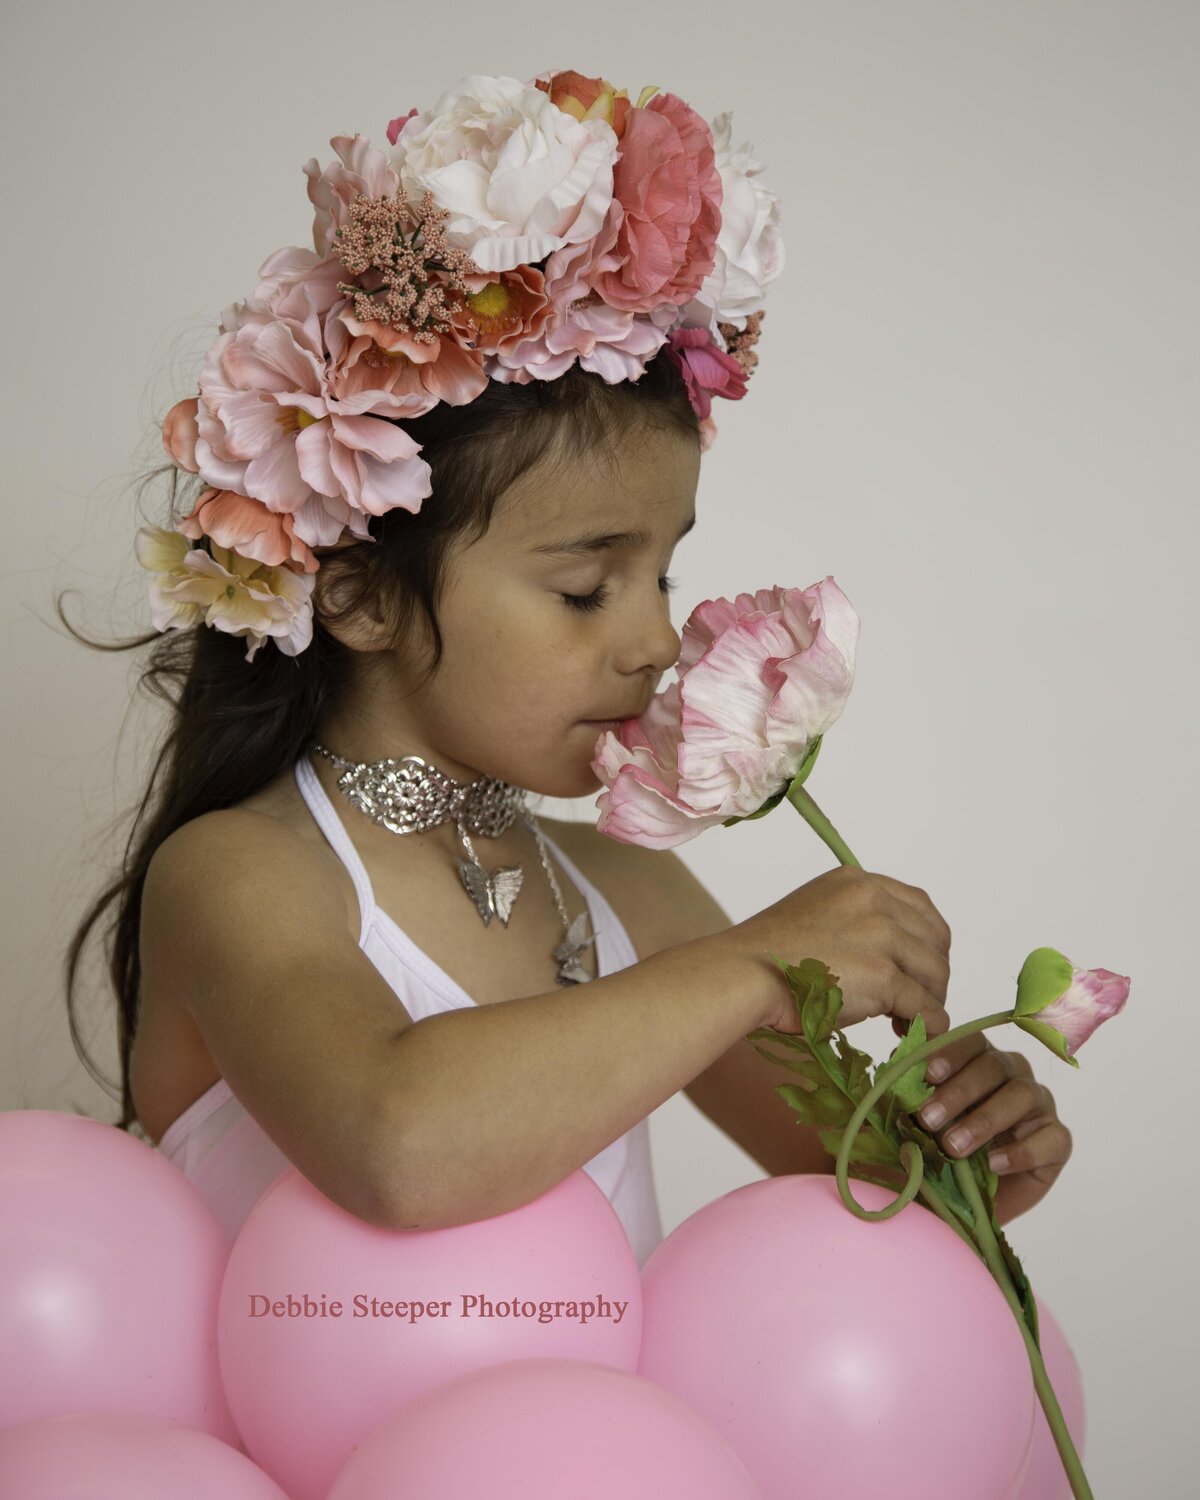 flower-headpiece-peony-p;ink-balloons-photoshoot-fashion-necklace-butterflies-debbie-steeper